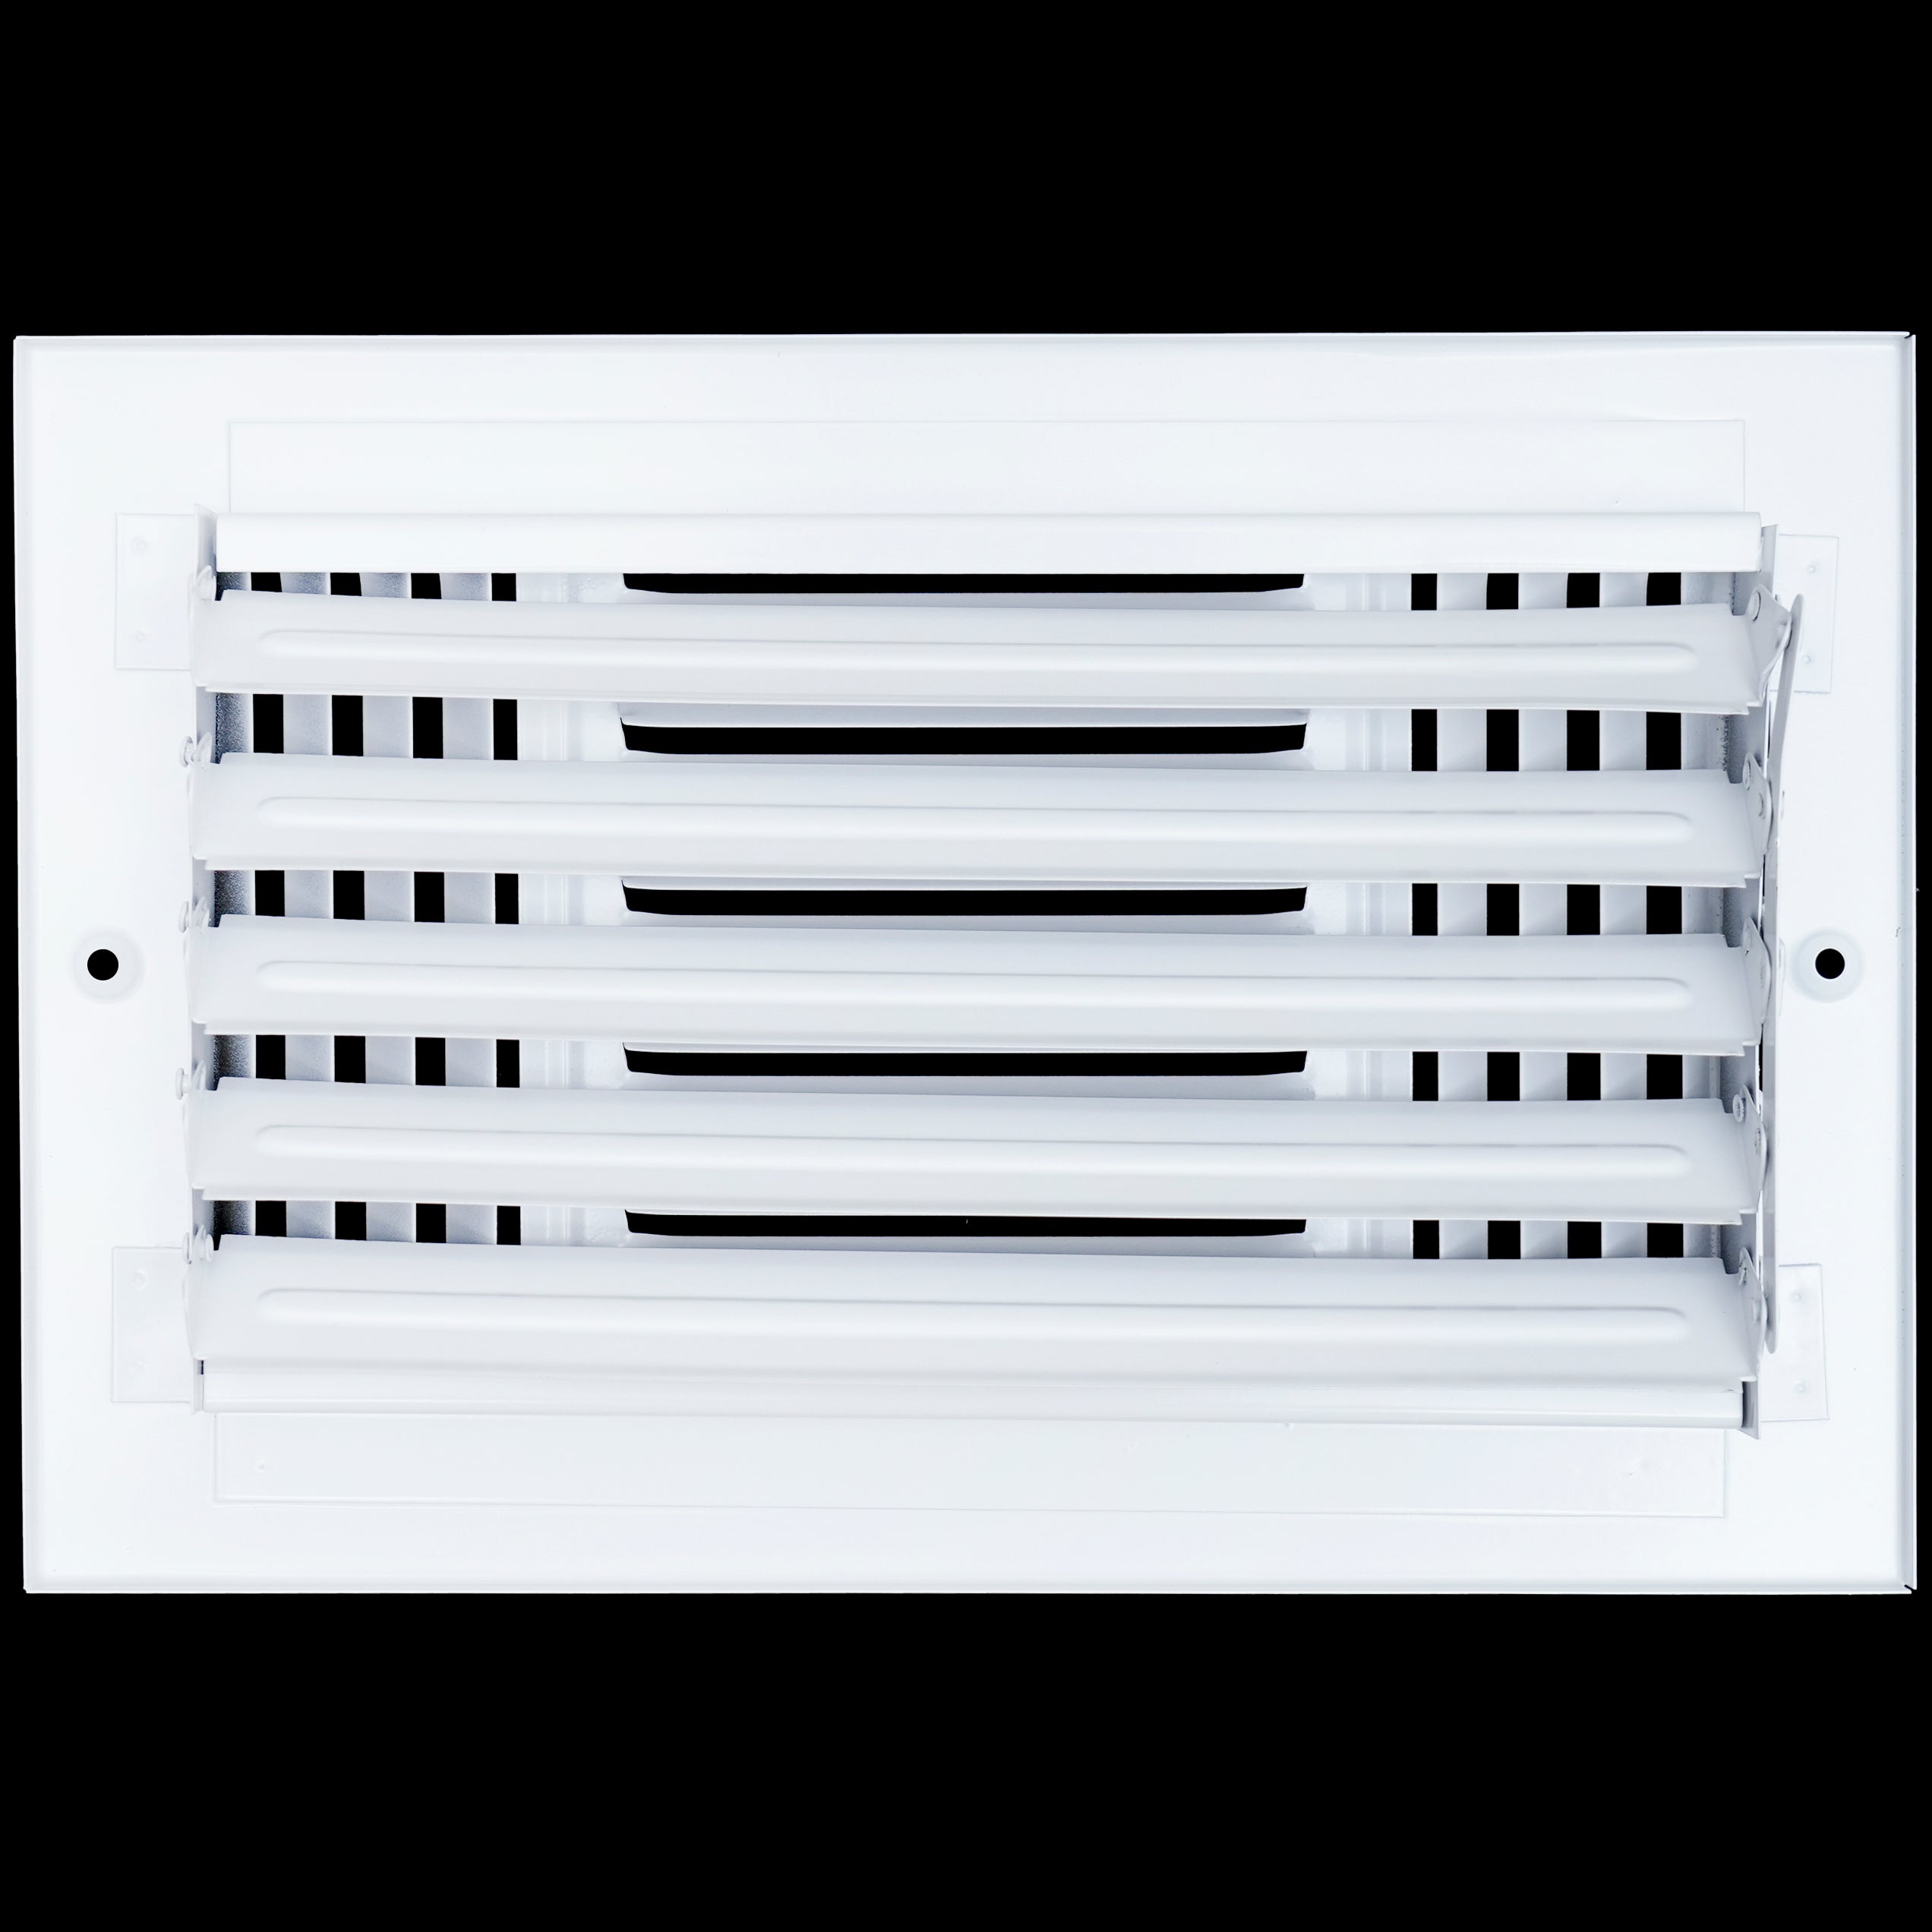 10 X 6 Duct Opening | 3 WAY Steel Air Supply Diffuser for Sidewall and Ceiling